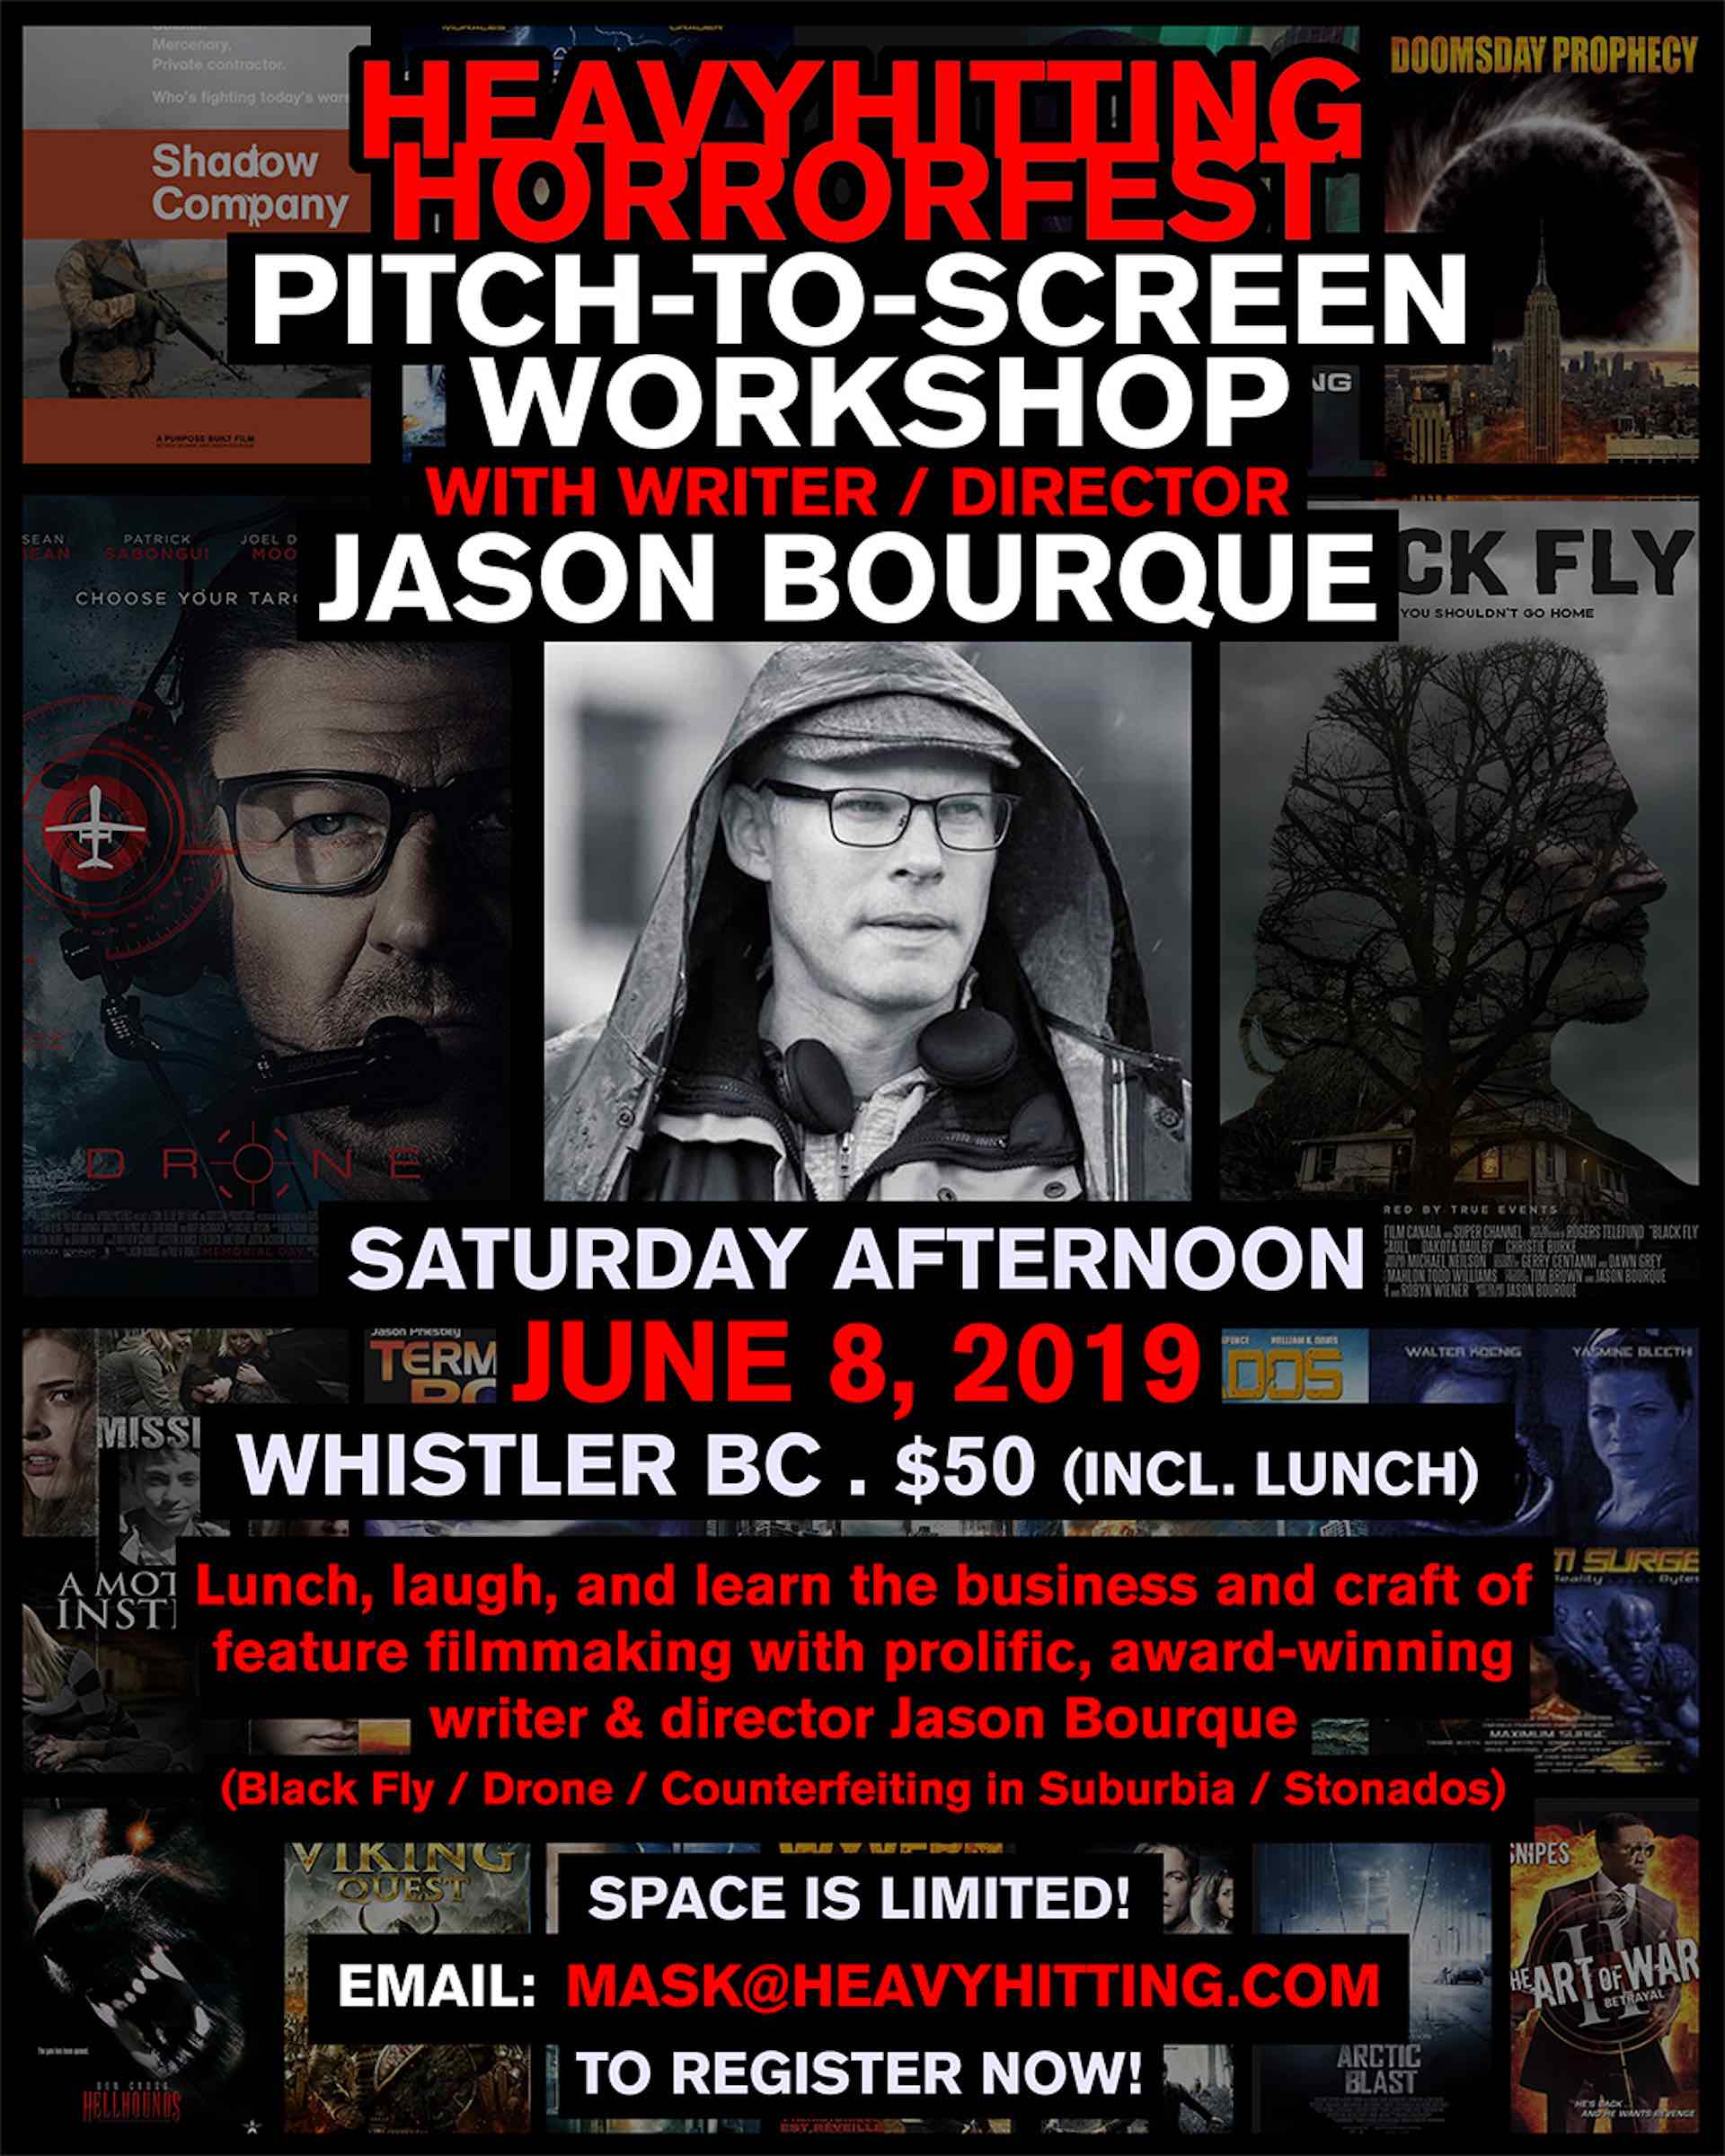 Heavy Hitting HorrorFest’s workshop with Canadian writer-director Jason Bourque happens on June 8: a pitch-to-screen workshop over a 3-hour lunch.